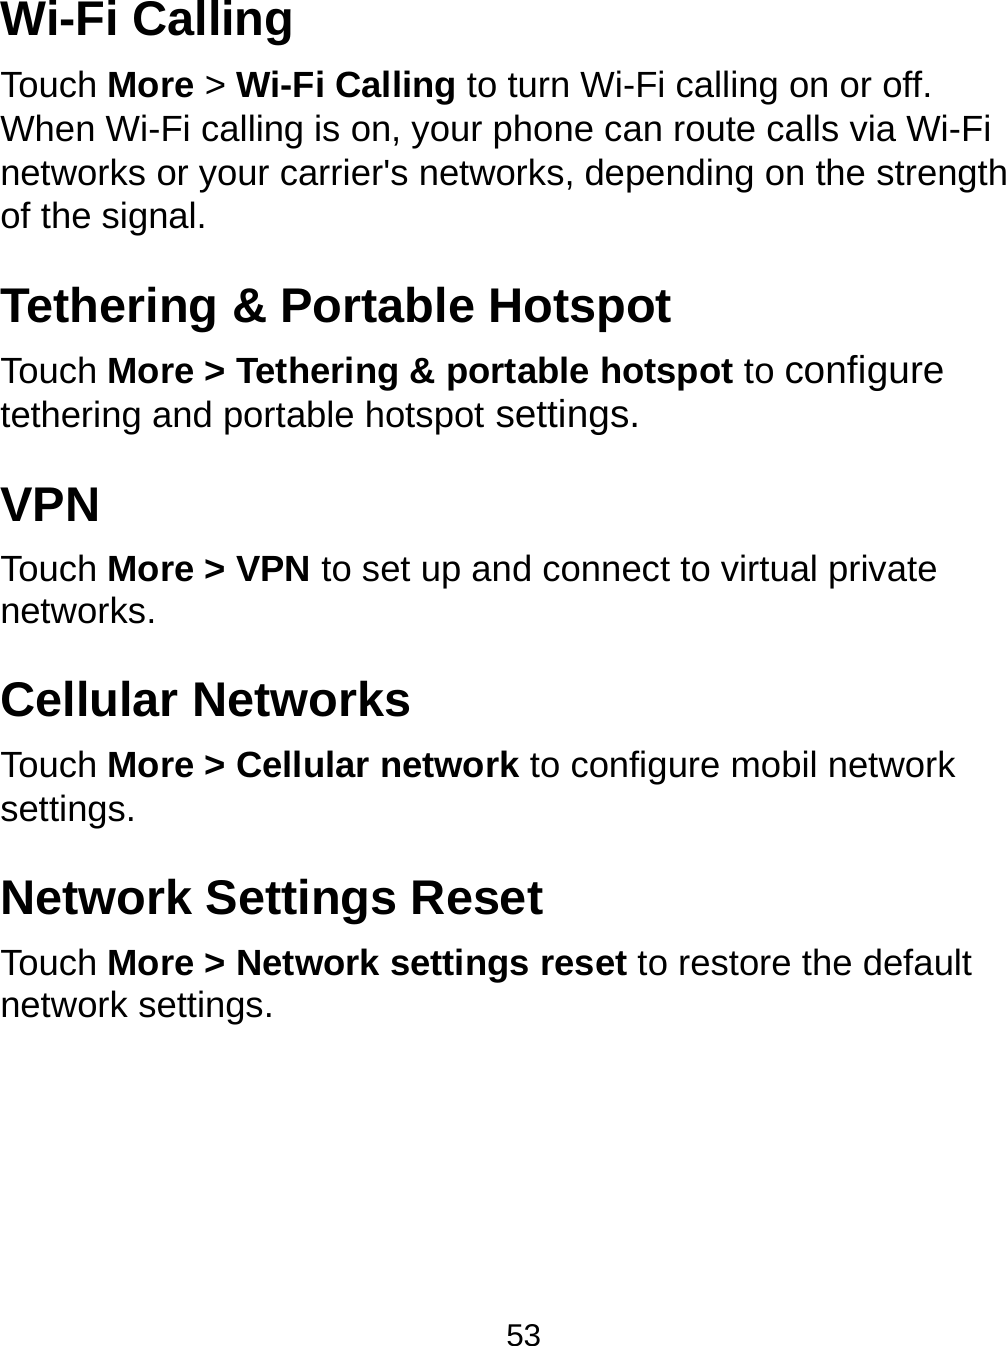  53 Wi-Fi Calling Touch More &gt; Wi-Fi Calling to turn Wi-Fi calling on or off. When Wi-Fi calling is on, your phone can route calls via Wi-Fi networks or your carrier&apos;s networks, depending on the strength of the signal. Tethering &amp; Portable Hotspot Touch More &gt; Tethering &amp; portable hotspot to configure tethering and portable hotspot settings. VPN Touch More &gt; VPN to set up and connect to virtual private networks. Cellular Networks Touch More &gt; Cellular network to configure mobil network settings. Network Settings Reset Touch More &gt; Network settings reset to restore the default network settings. 